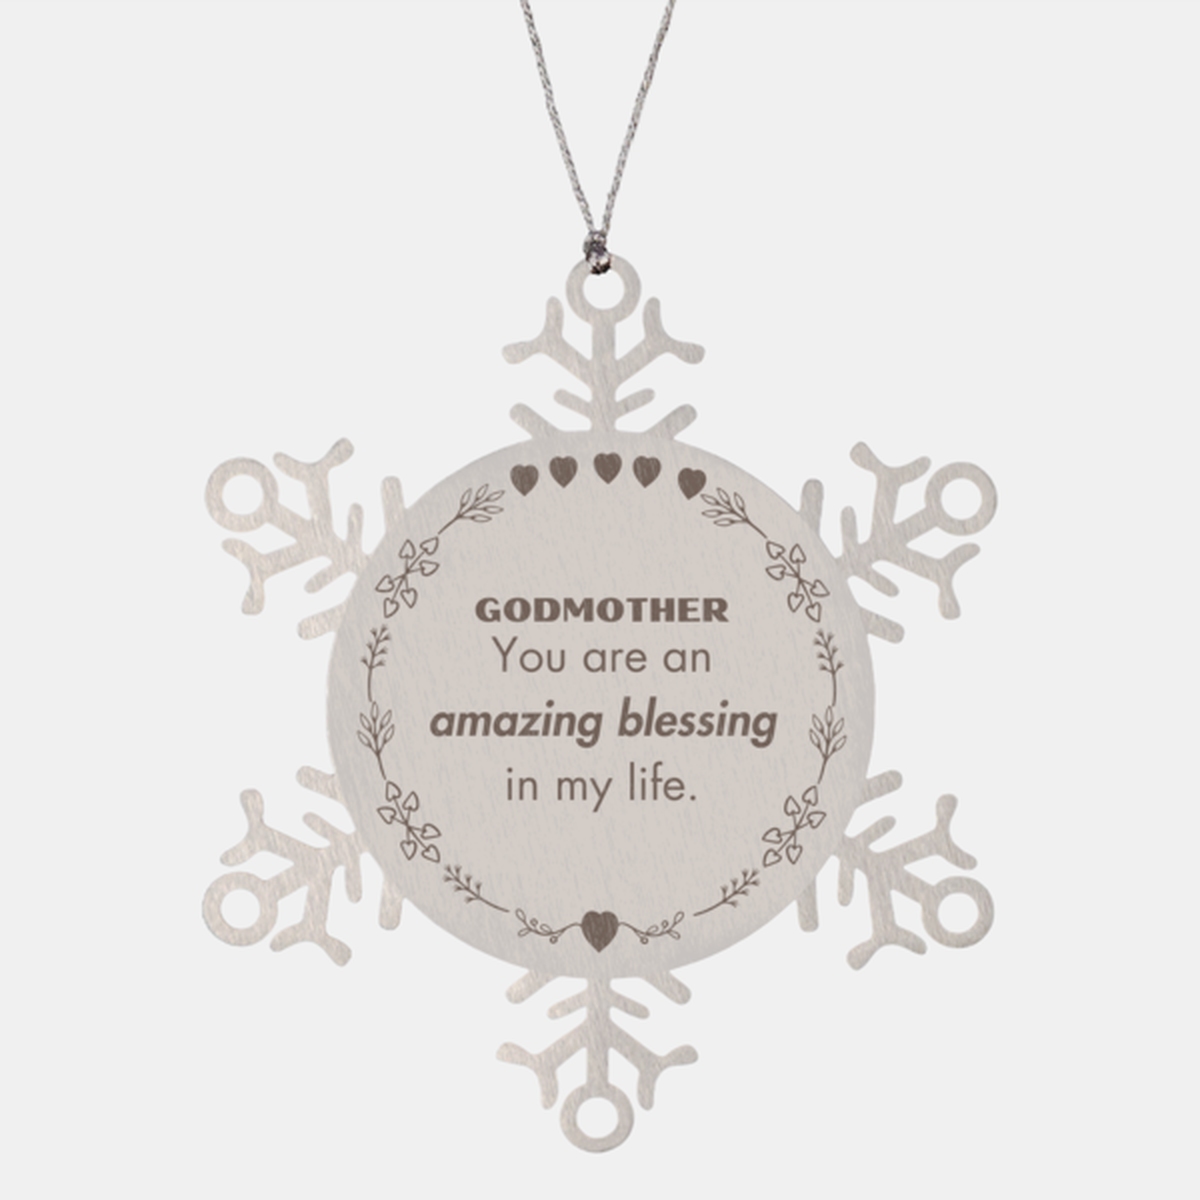 Godmother Snowflake Ornament, You are an amazing blessing in my life, Thank You Gifts For Godmother, Inspirational Birthday Christmas Unique Gifts For Godmother